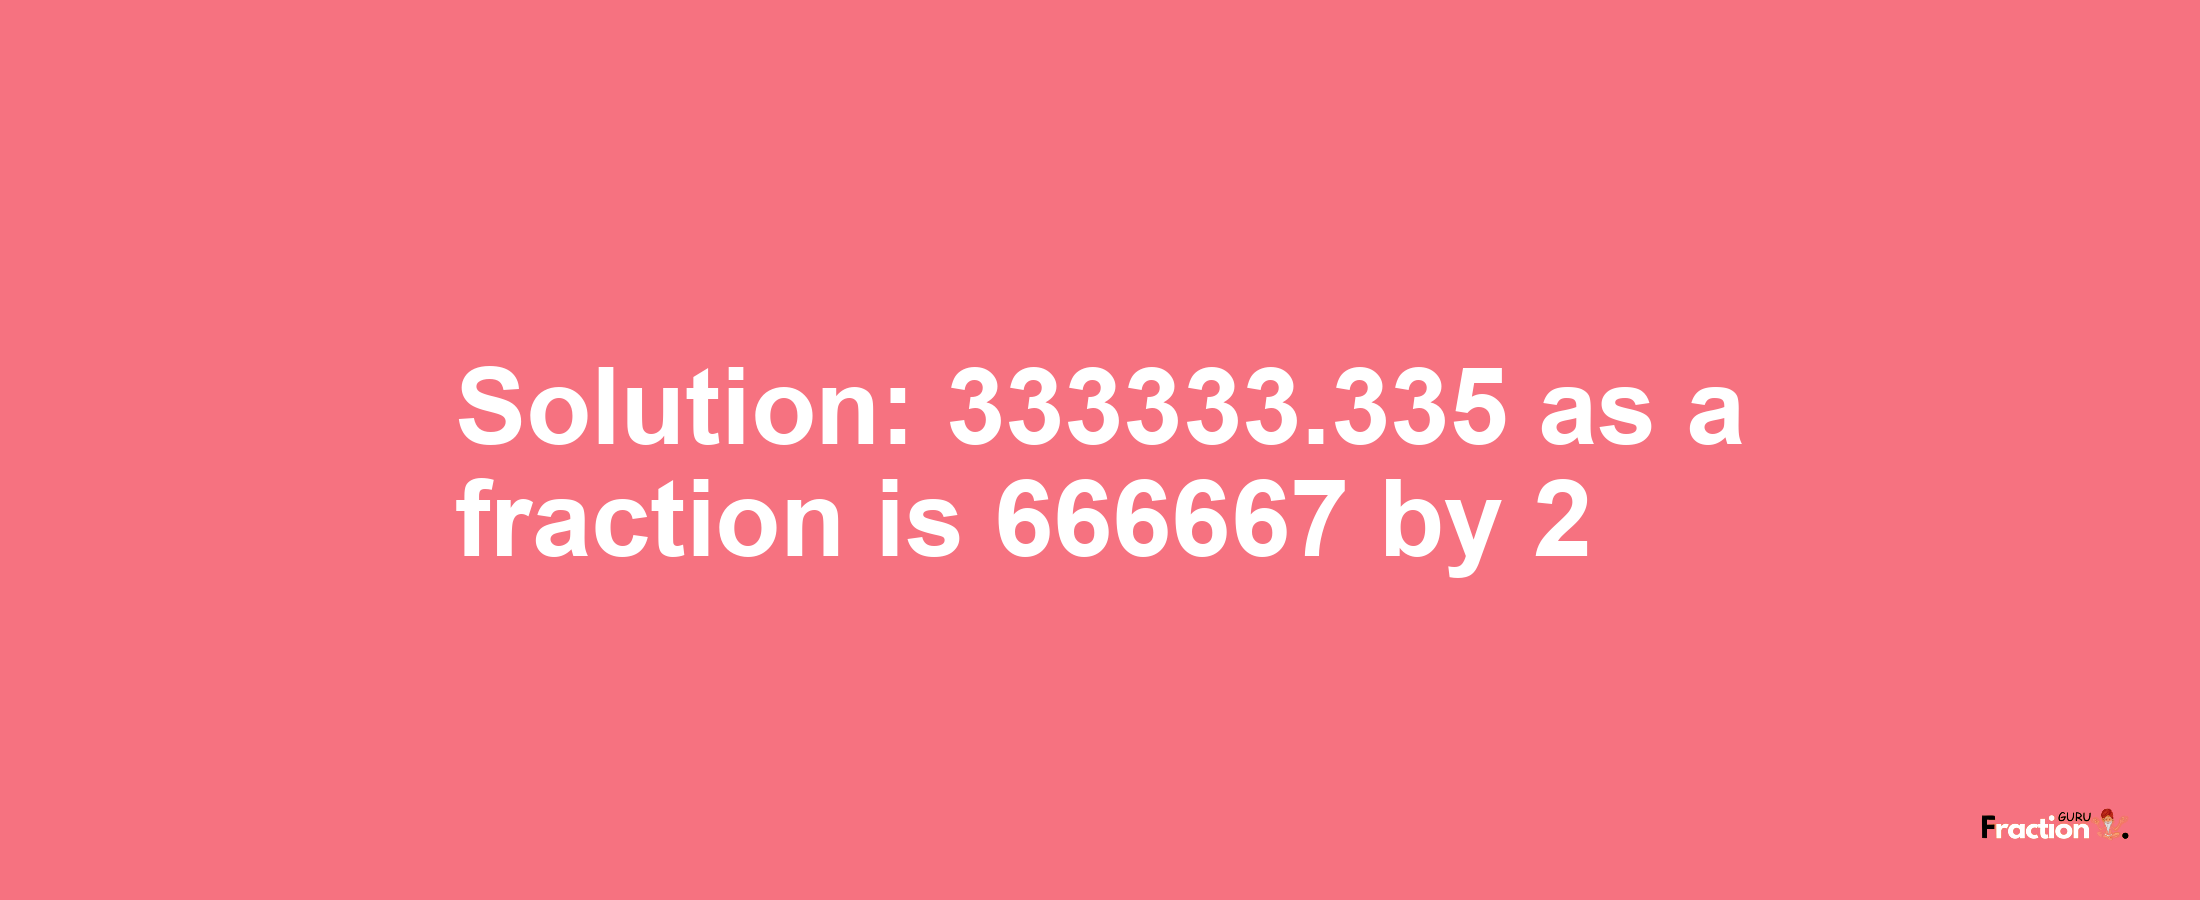 Solution:333333.335 as a fraction is 666667/2